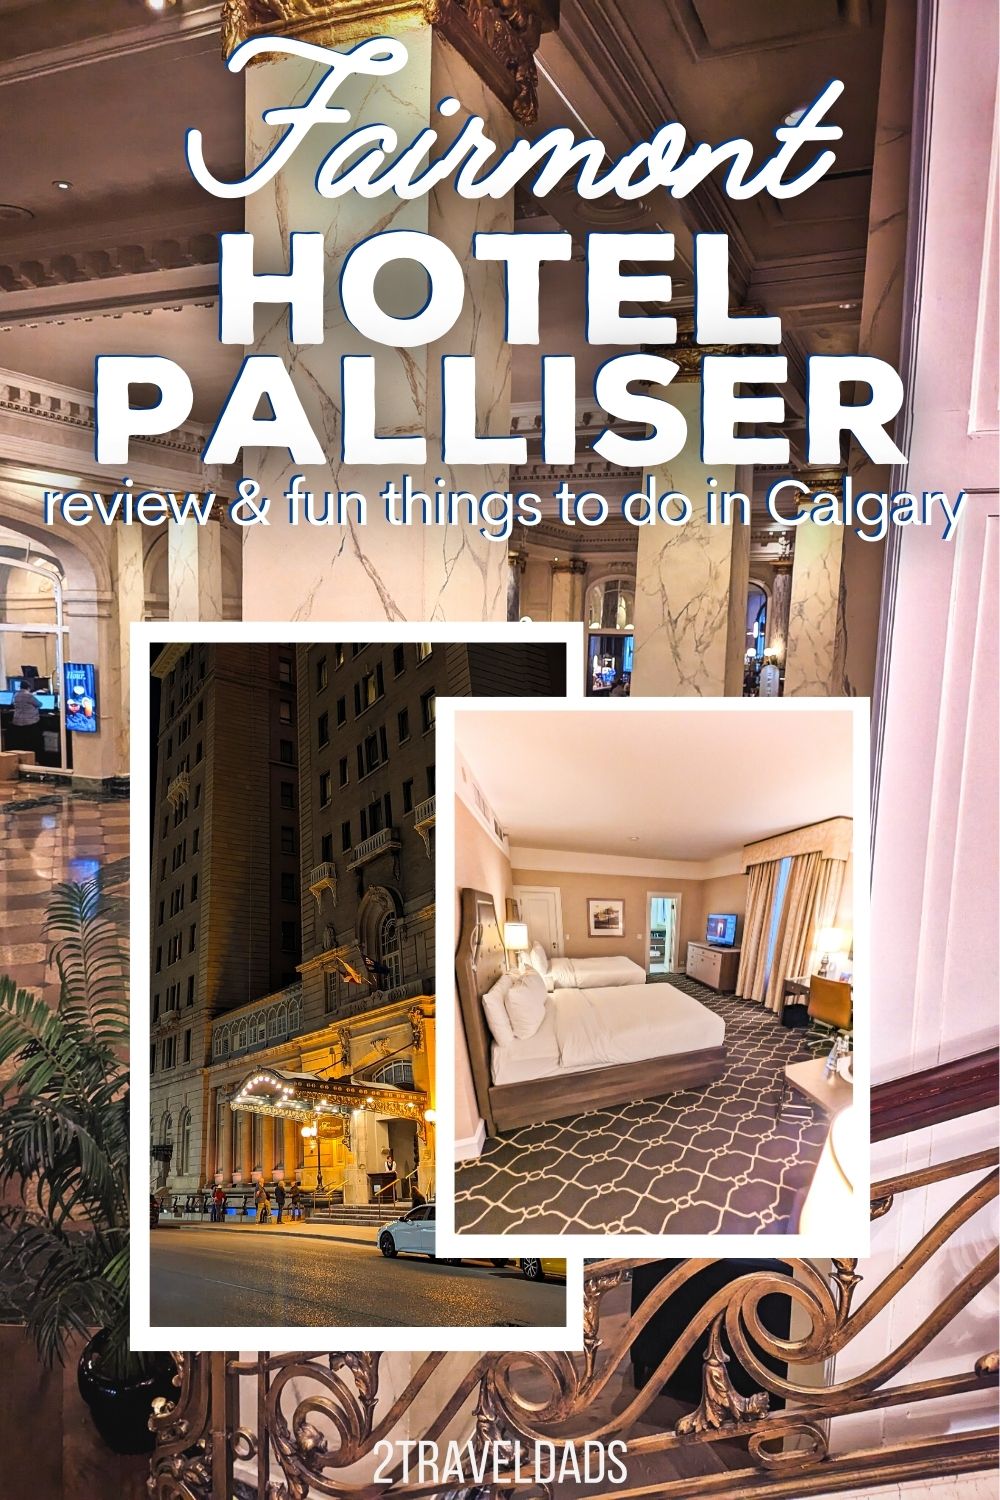 We just stayed at the historic Fairmont Palliser Hotel in downtown Calgary and this is our review. Details about what we liked, the hotel amenities and ideas for fun things to do in downtown Calgary.